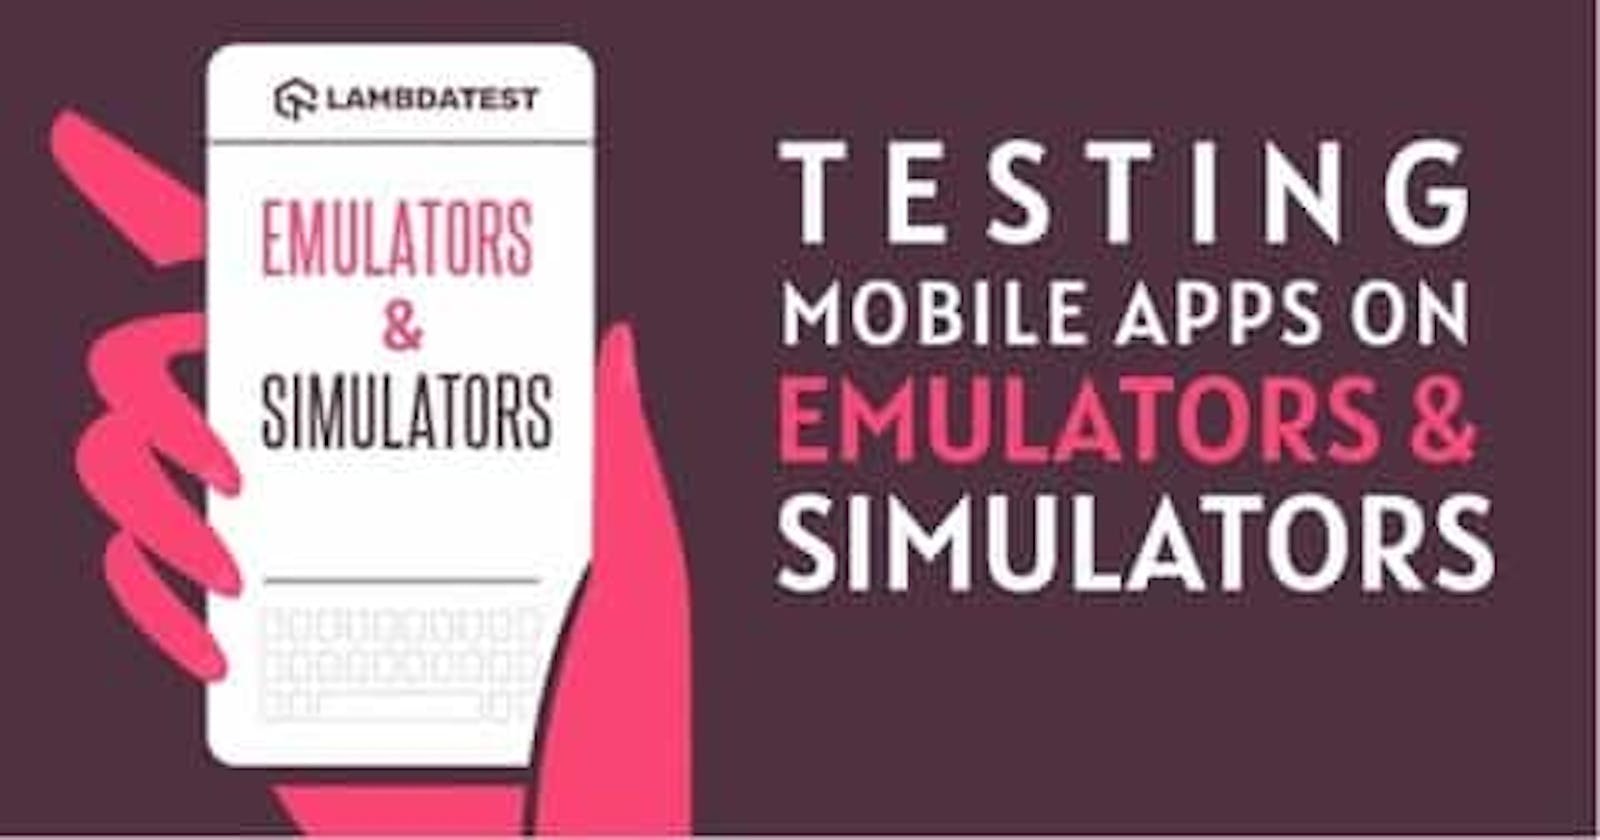 Getting Started With Mobile App Testing Using Emulators And Simulators